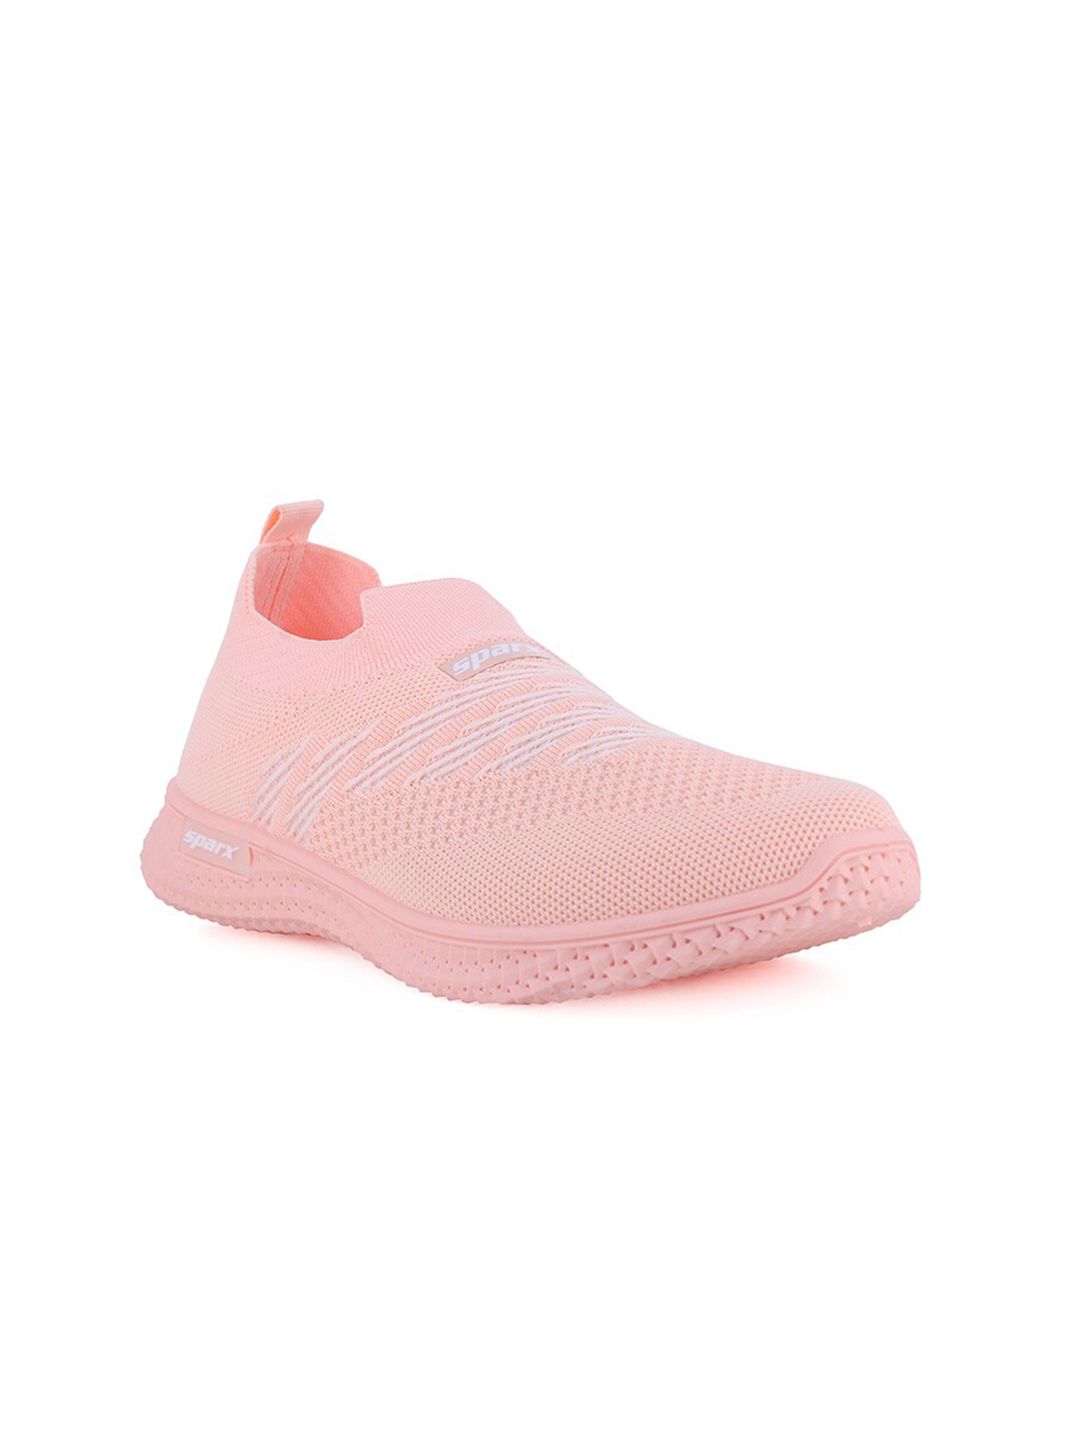 Sparx Women Textile Running Non-Marking Shoes Price in India